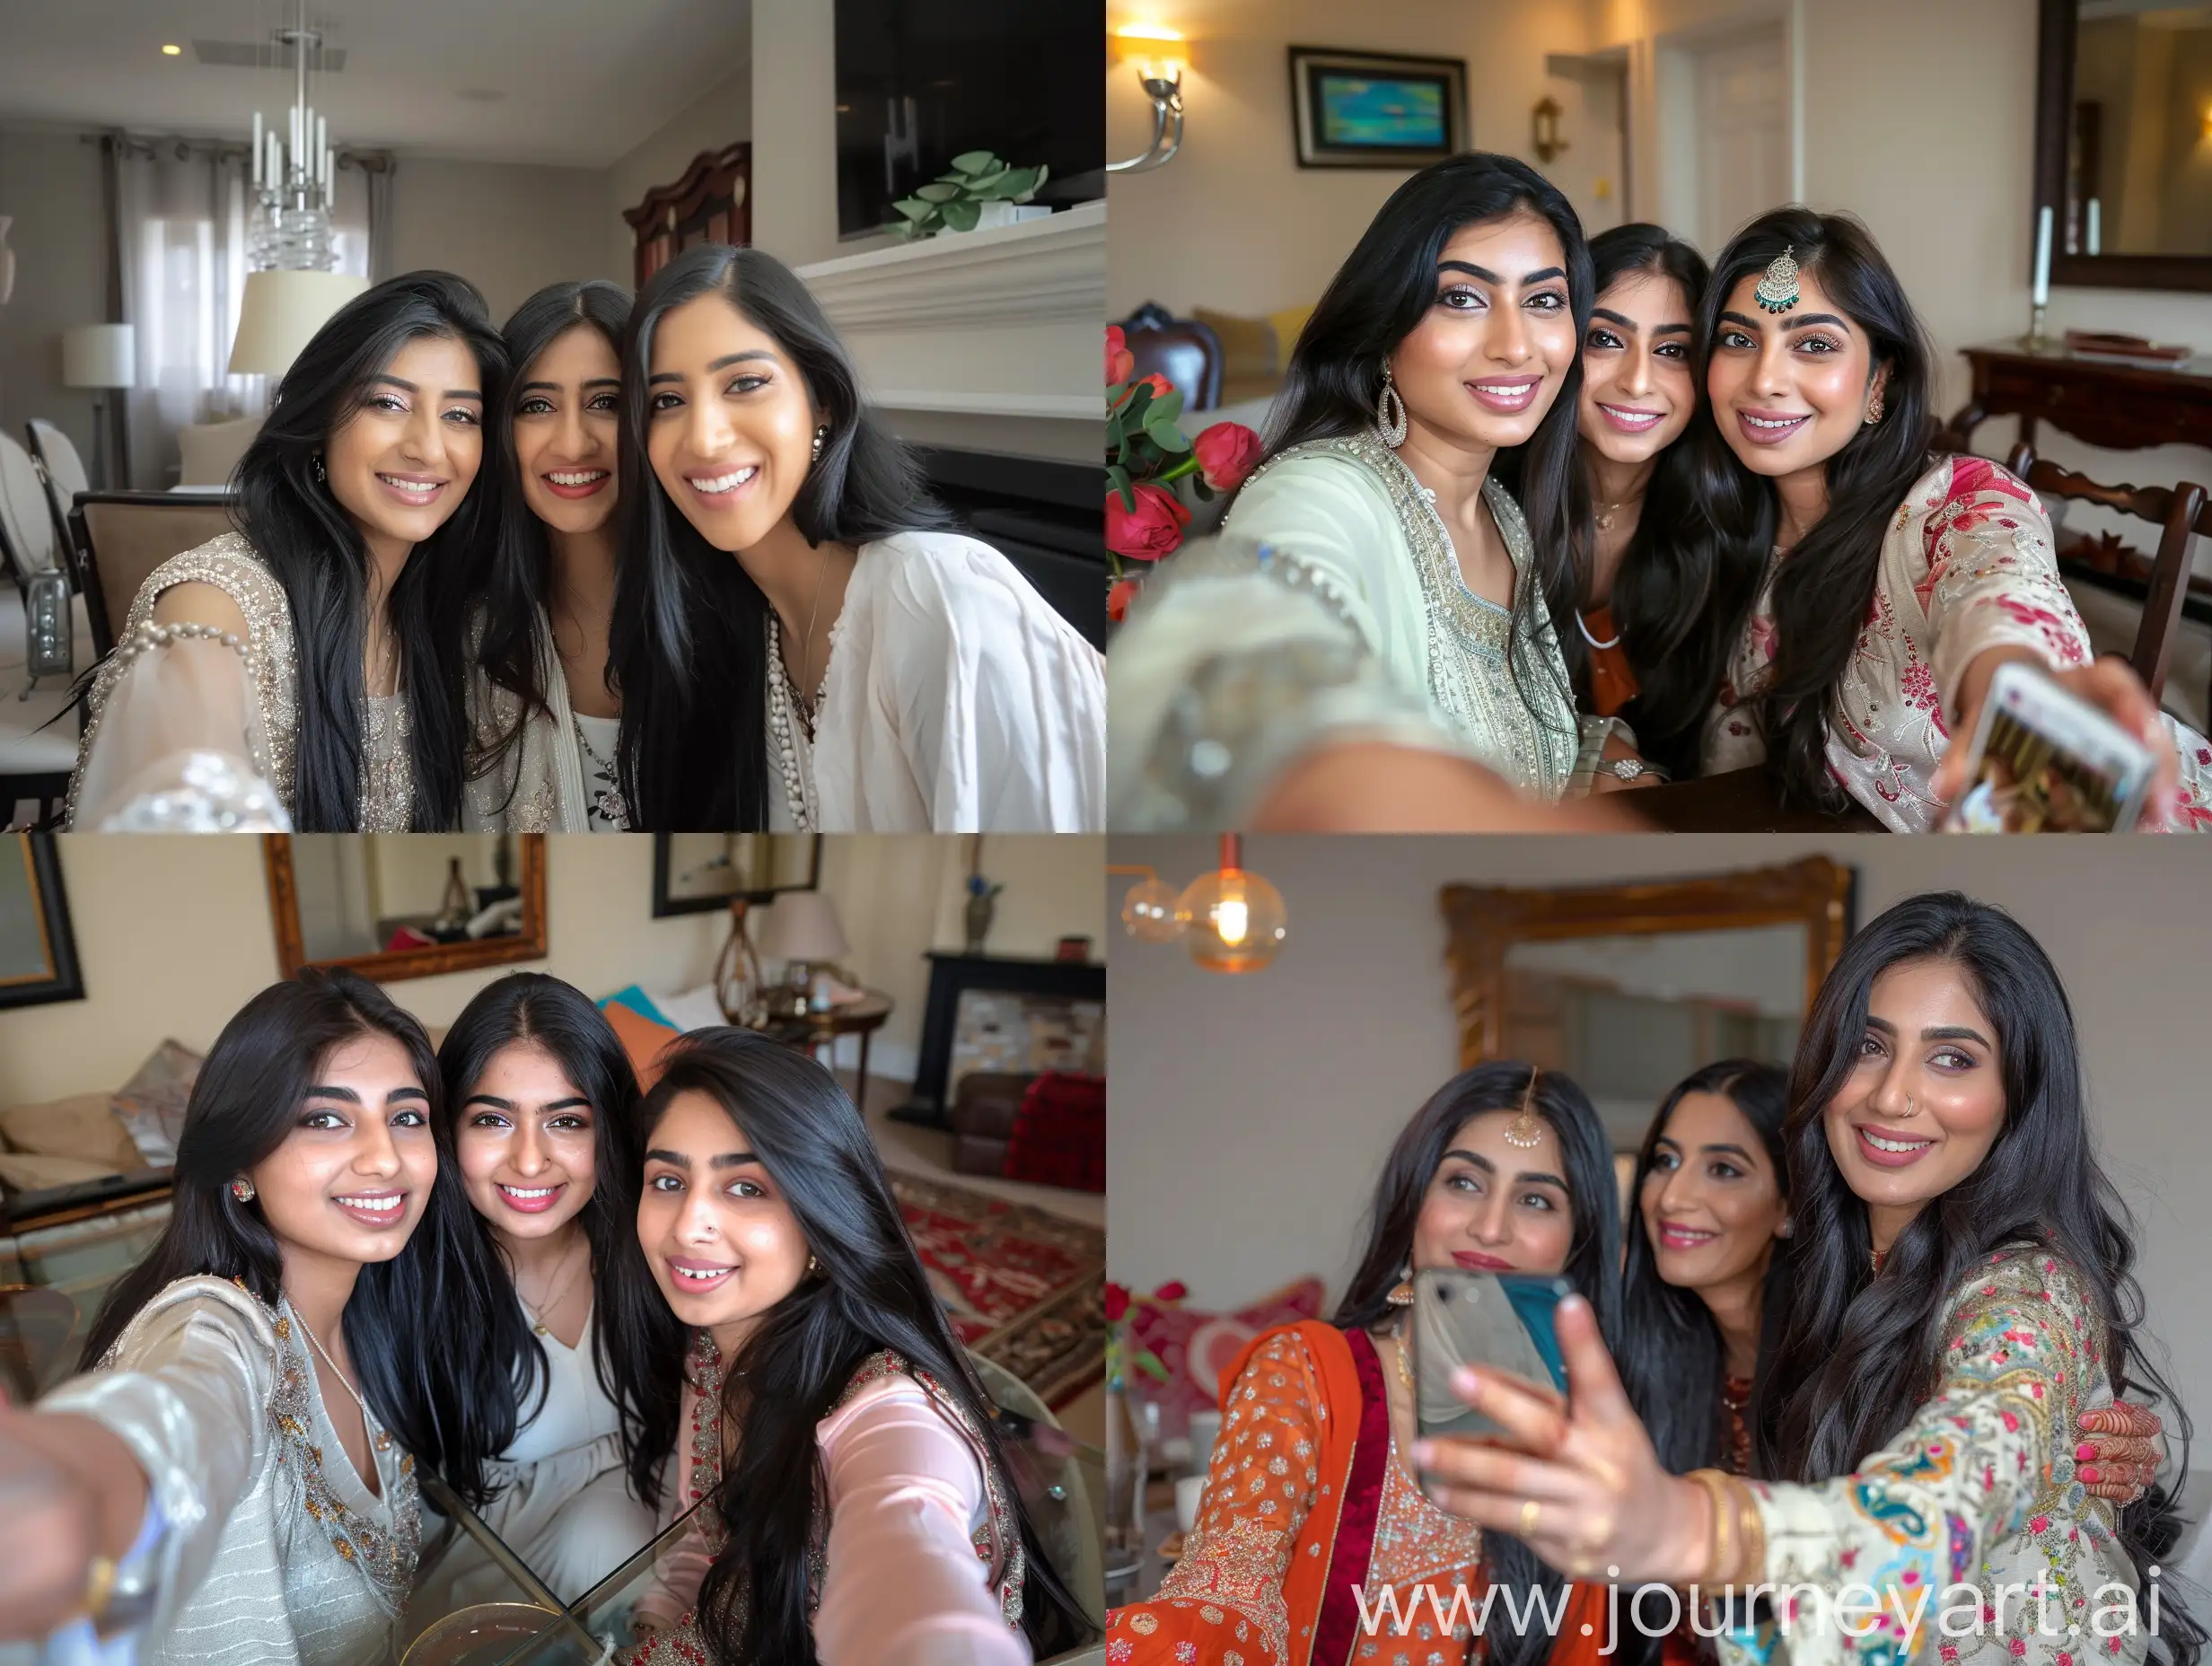 Stylish-British-Pakistani-Women-and-Mother-Capturing-Selfie-Moment-in-Dining-Room